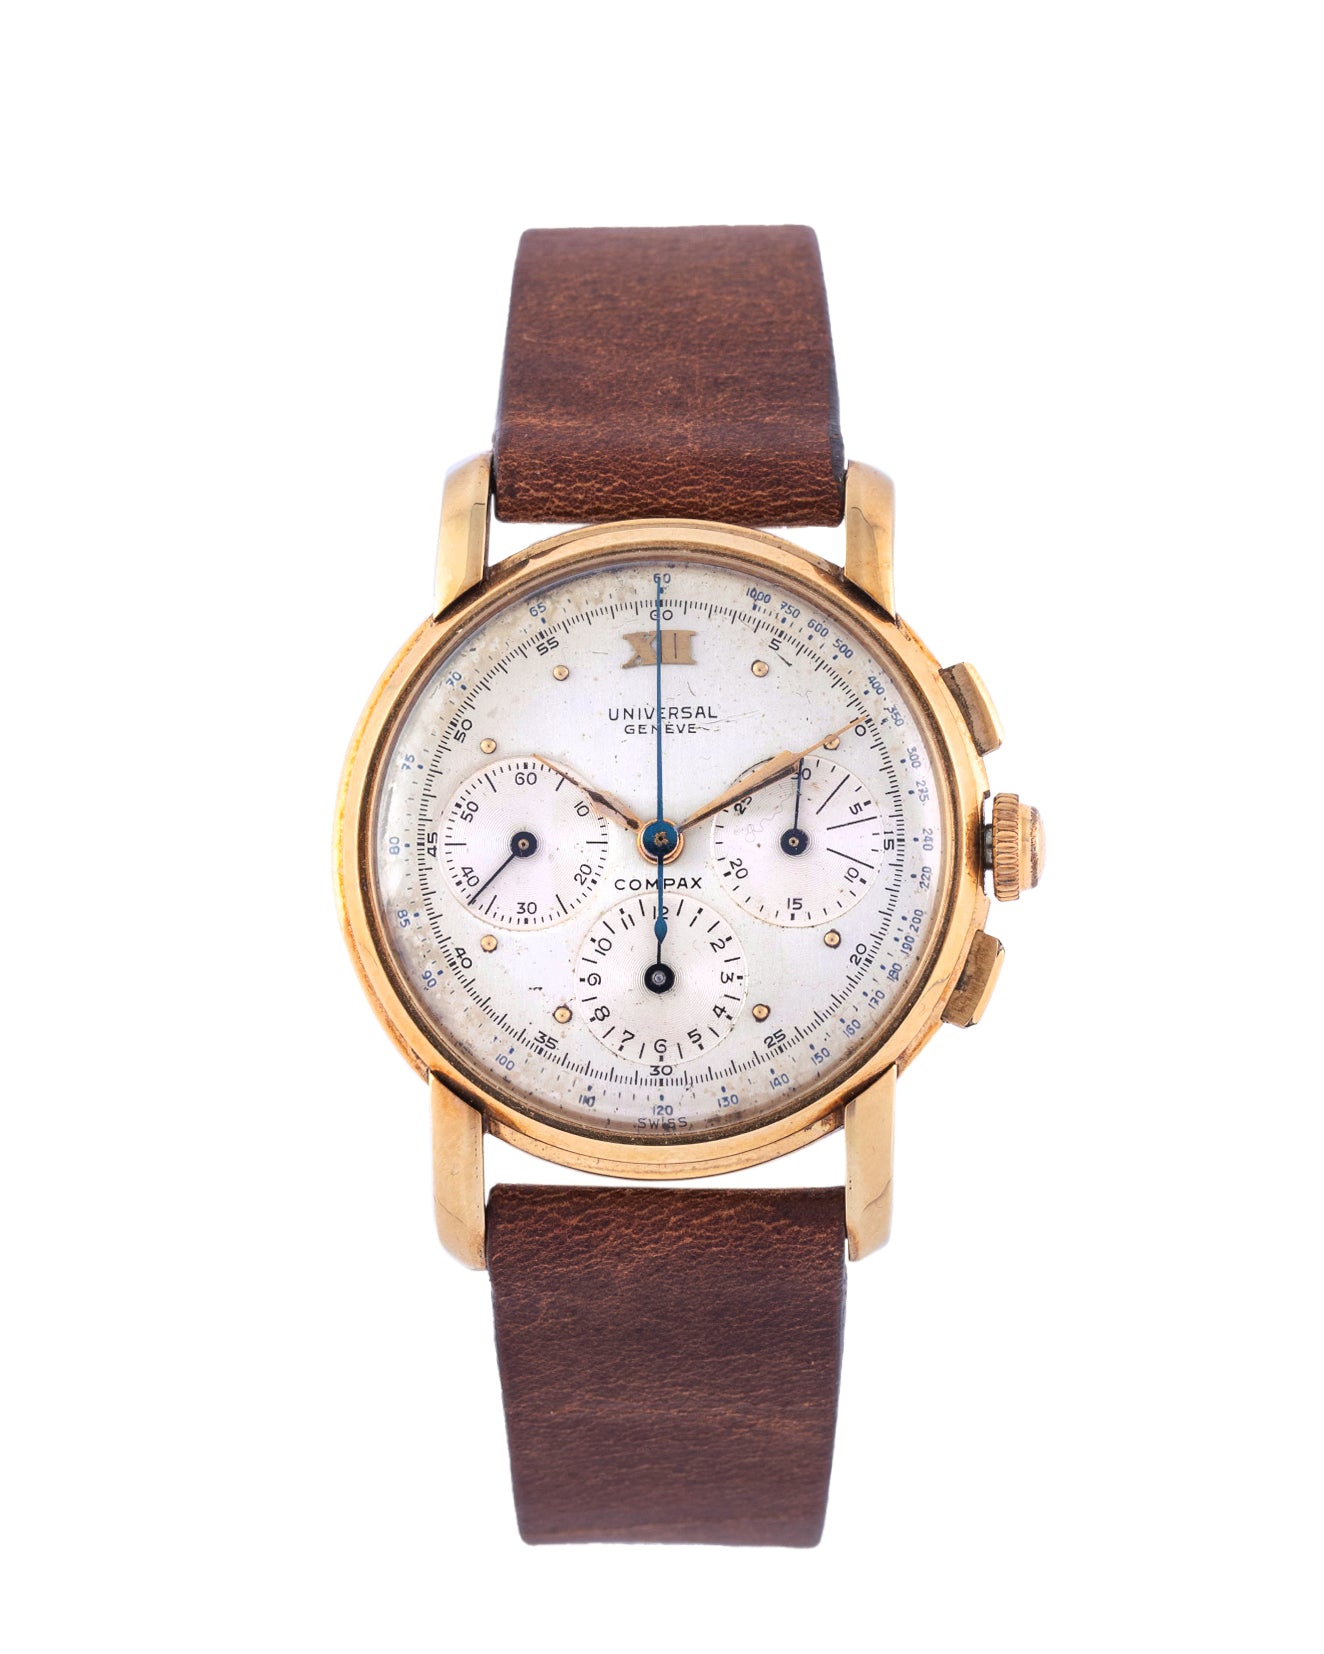 Universal Genève Ref. 52208 Compax - yellow gold with white dial 